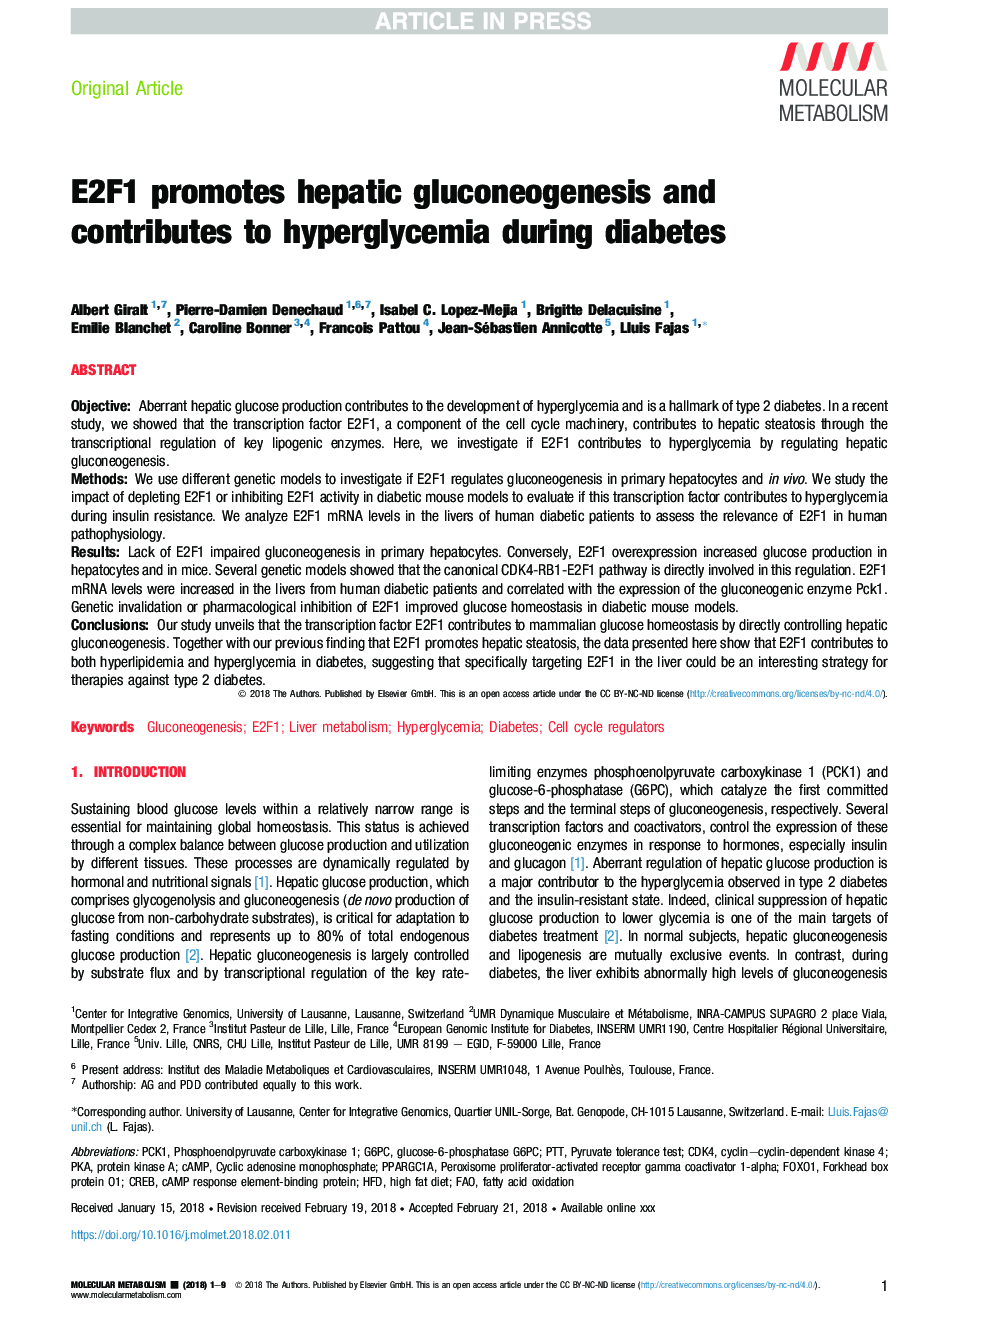 E2F1 promotes hepatic gluconeogenesis and contributes to hyperglycemia during diabetes